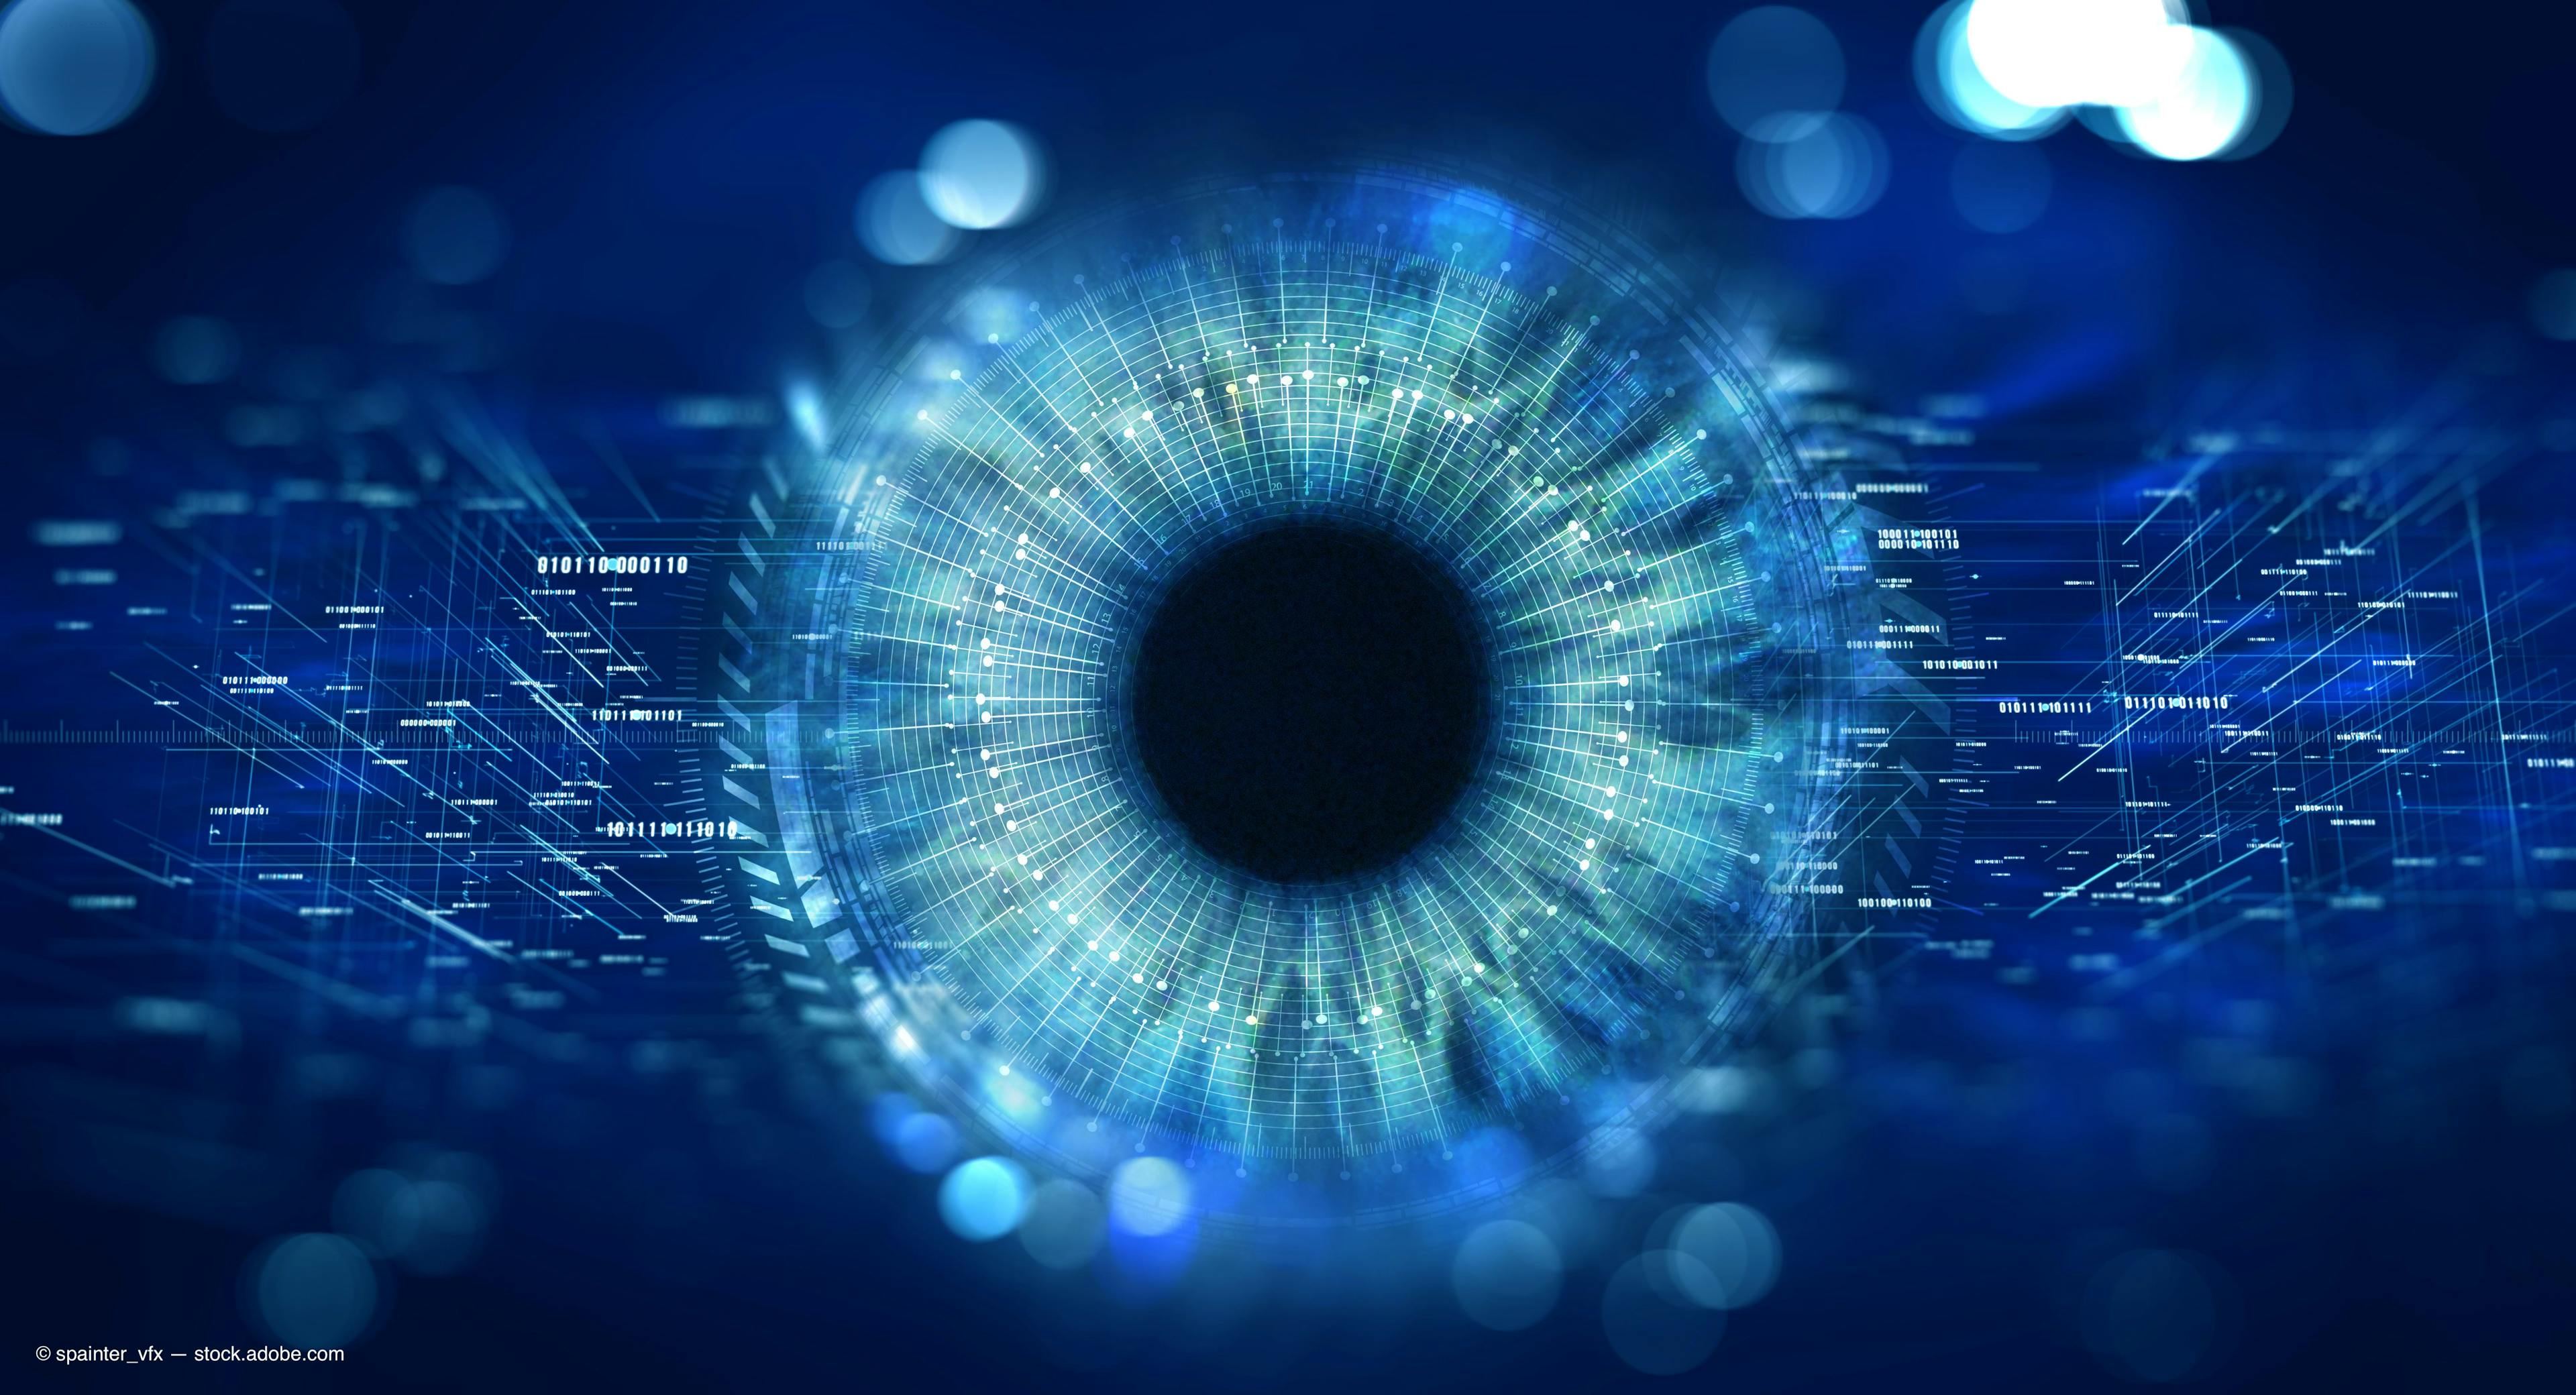 The future of ophthalmology: Part II